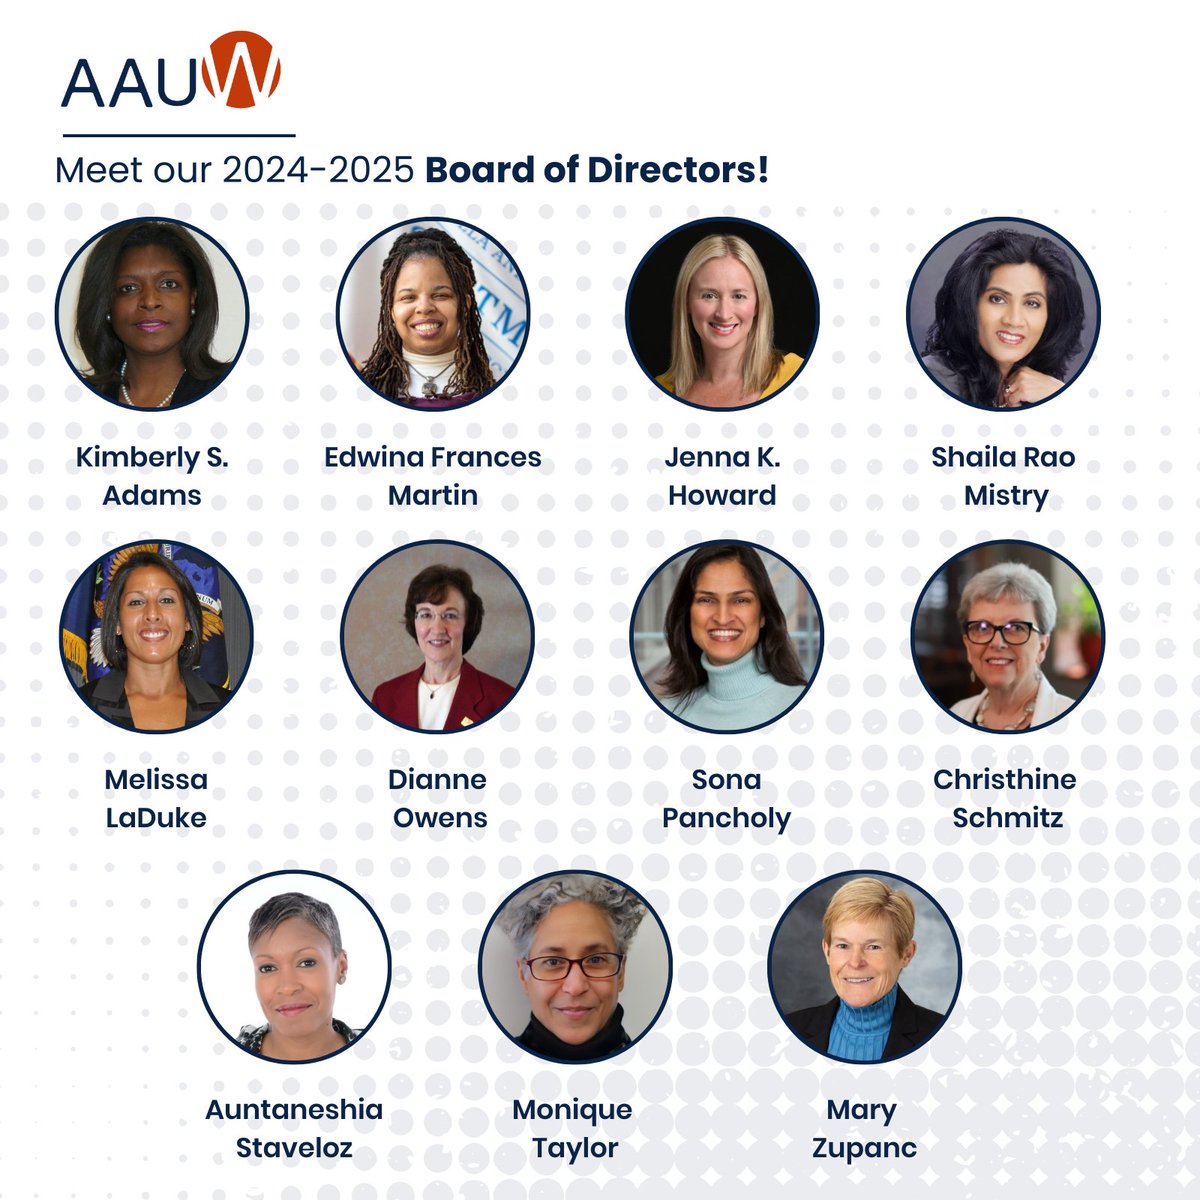 For the first time since 2017, we are welcoming new board leadership as we usher in an exciting new era for the organization. We are thrilled to announce Cheryl Sorokin as our incoming Board Chair and Gloria Banuelos as Vice Chair. Peggy Cabaniss is delighted to continue as